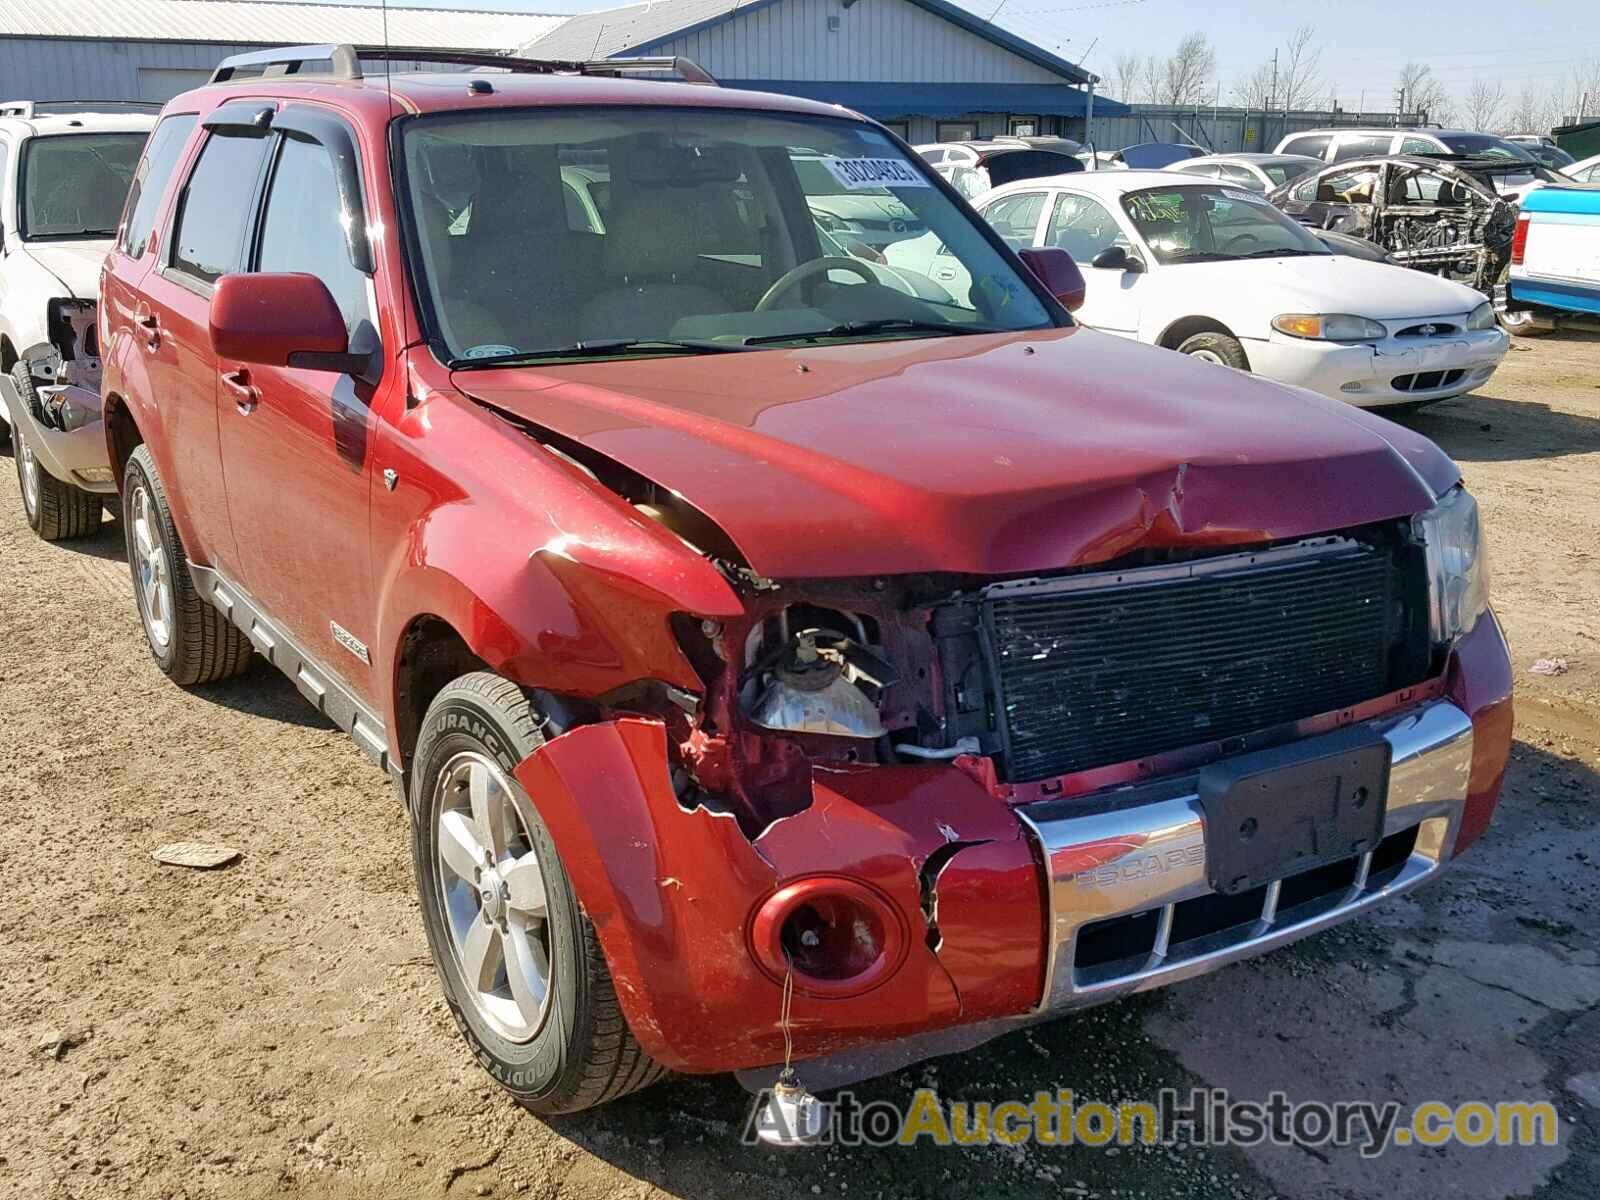 2008 FORD ESCAPE LIMITED, 1FMCU94118KC40310